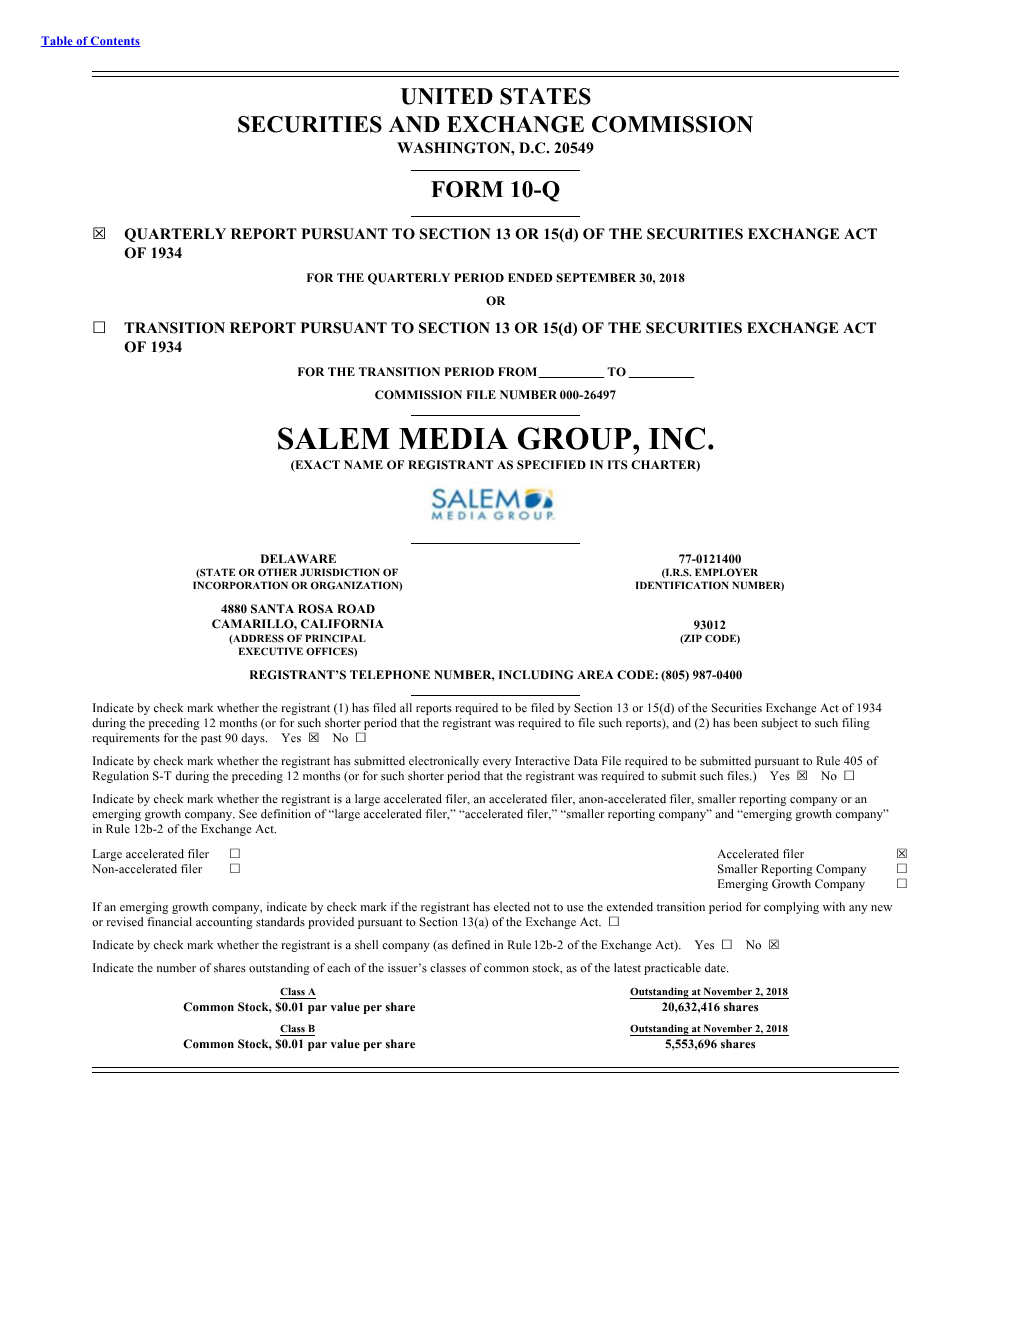 Salem Media Group, Inc. (Exact Name of Registrant As Specified in Its Charter)